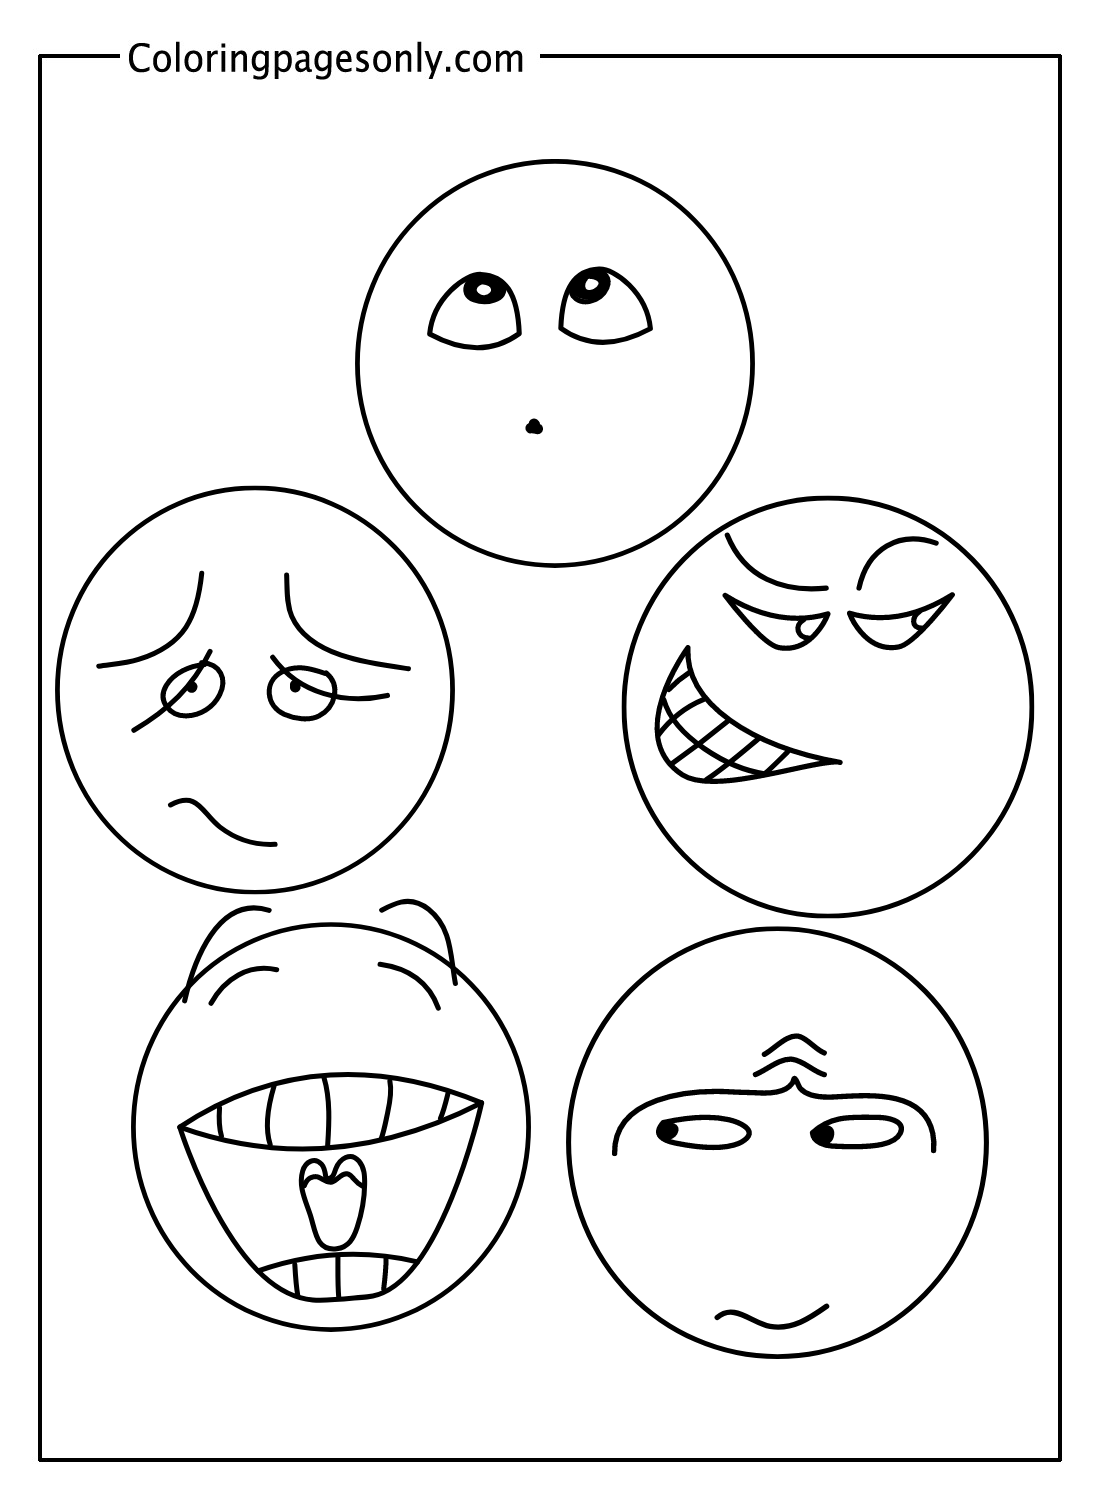 Printable Emotions Sheets Coloring Page Free Printable Coloring Pages